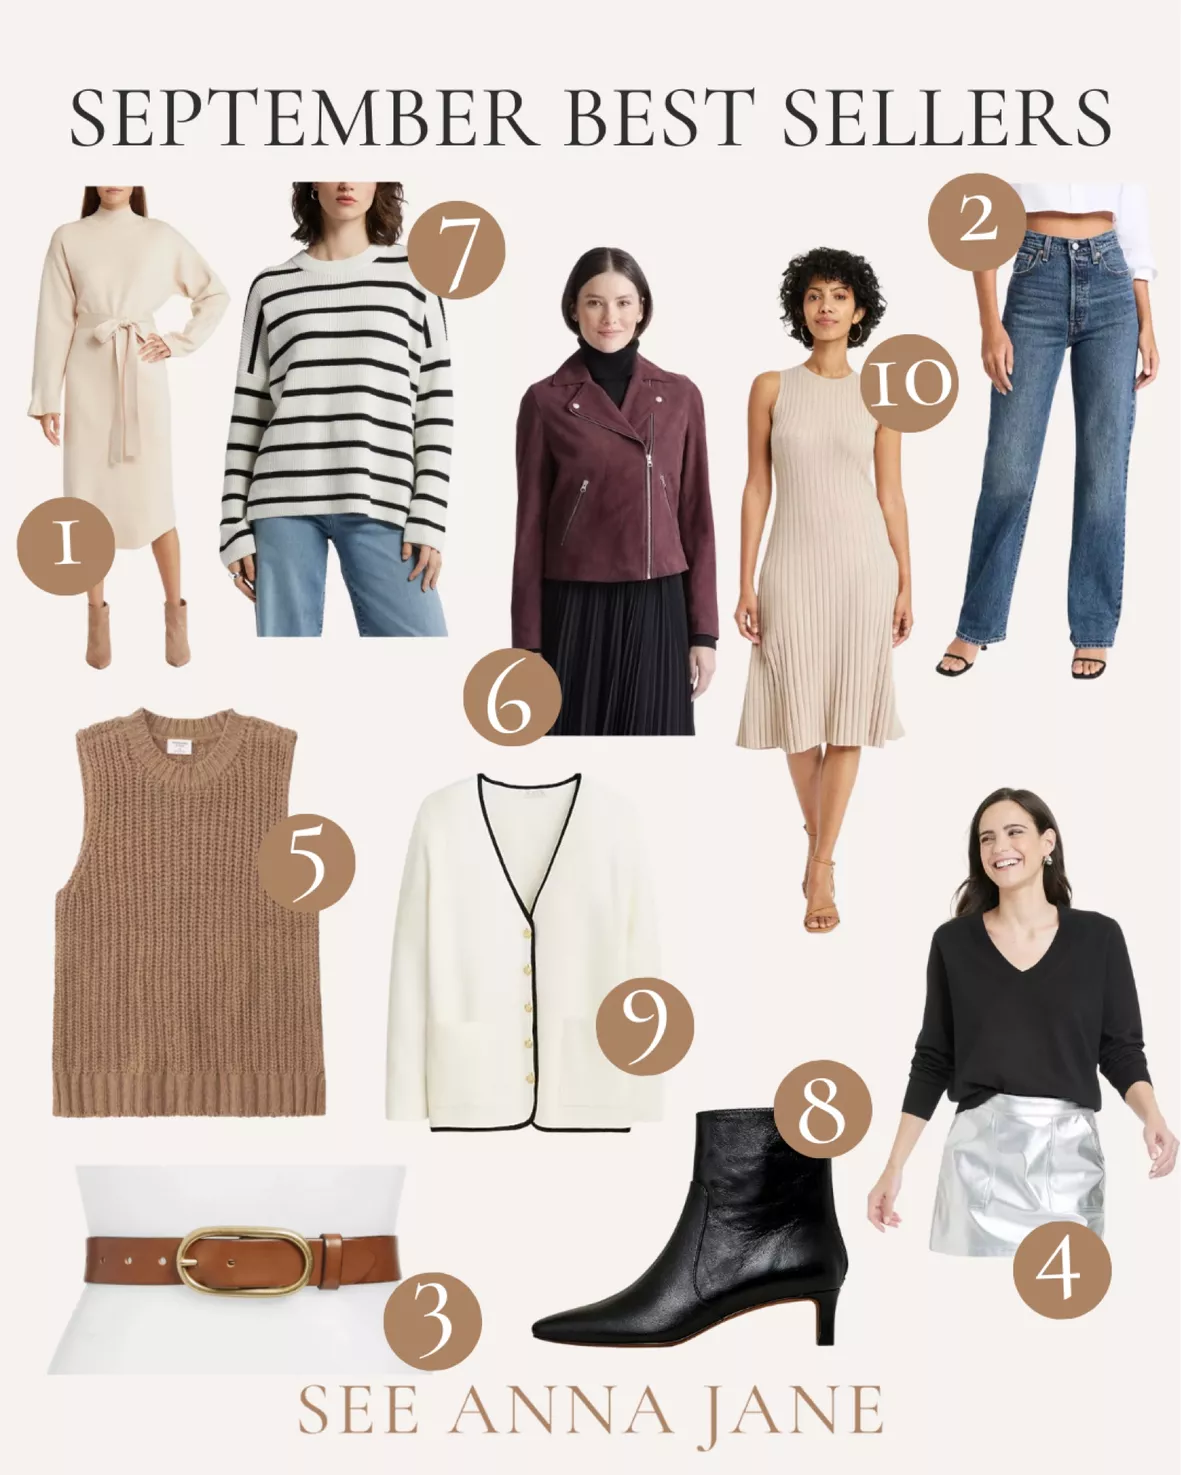 September Best Sellers, Fall Fashion